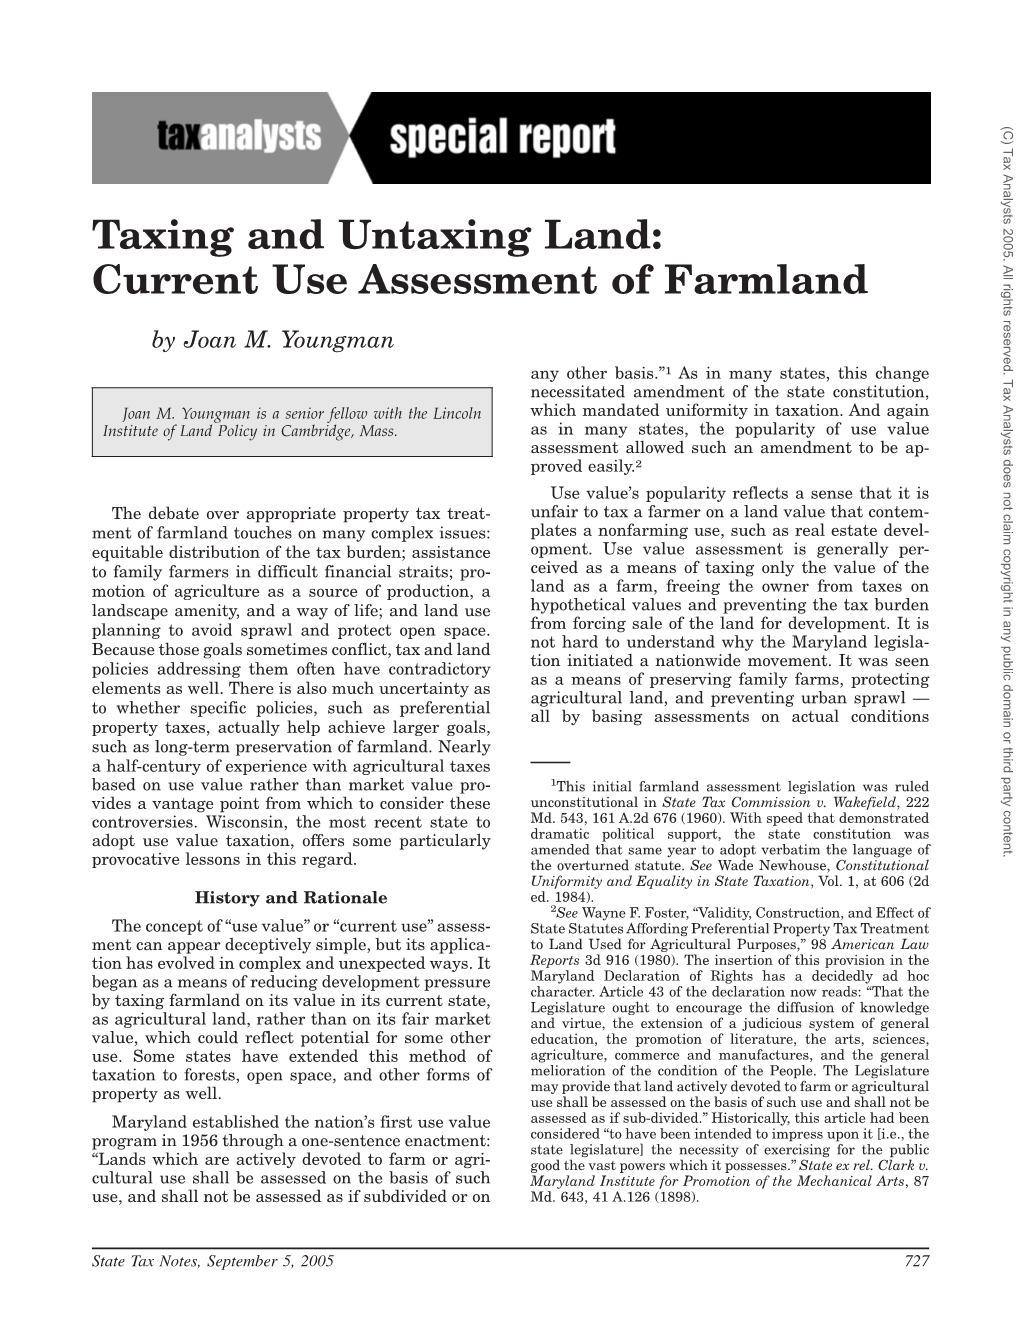 Taxing and Untaxing Land: Current Use Assessment of Farmland